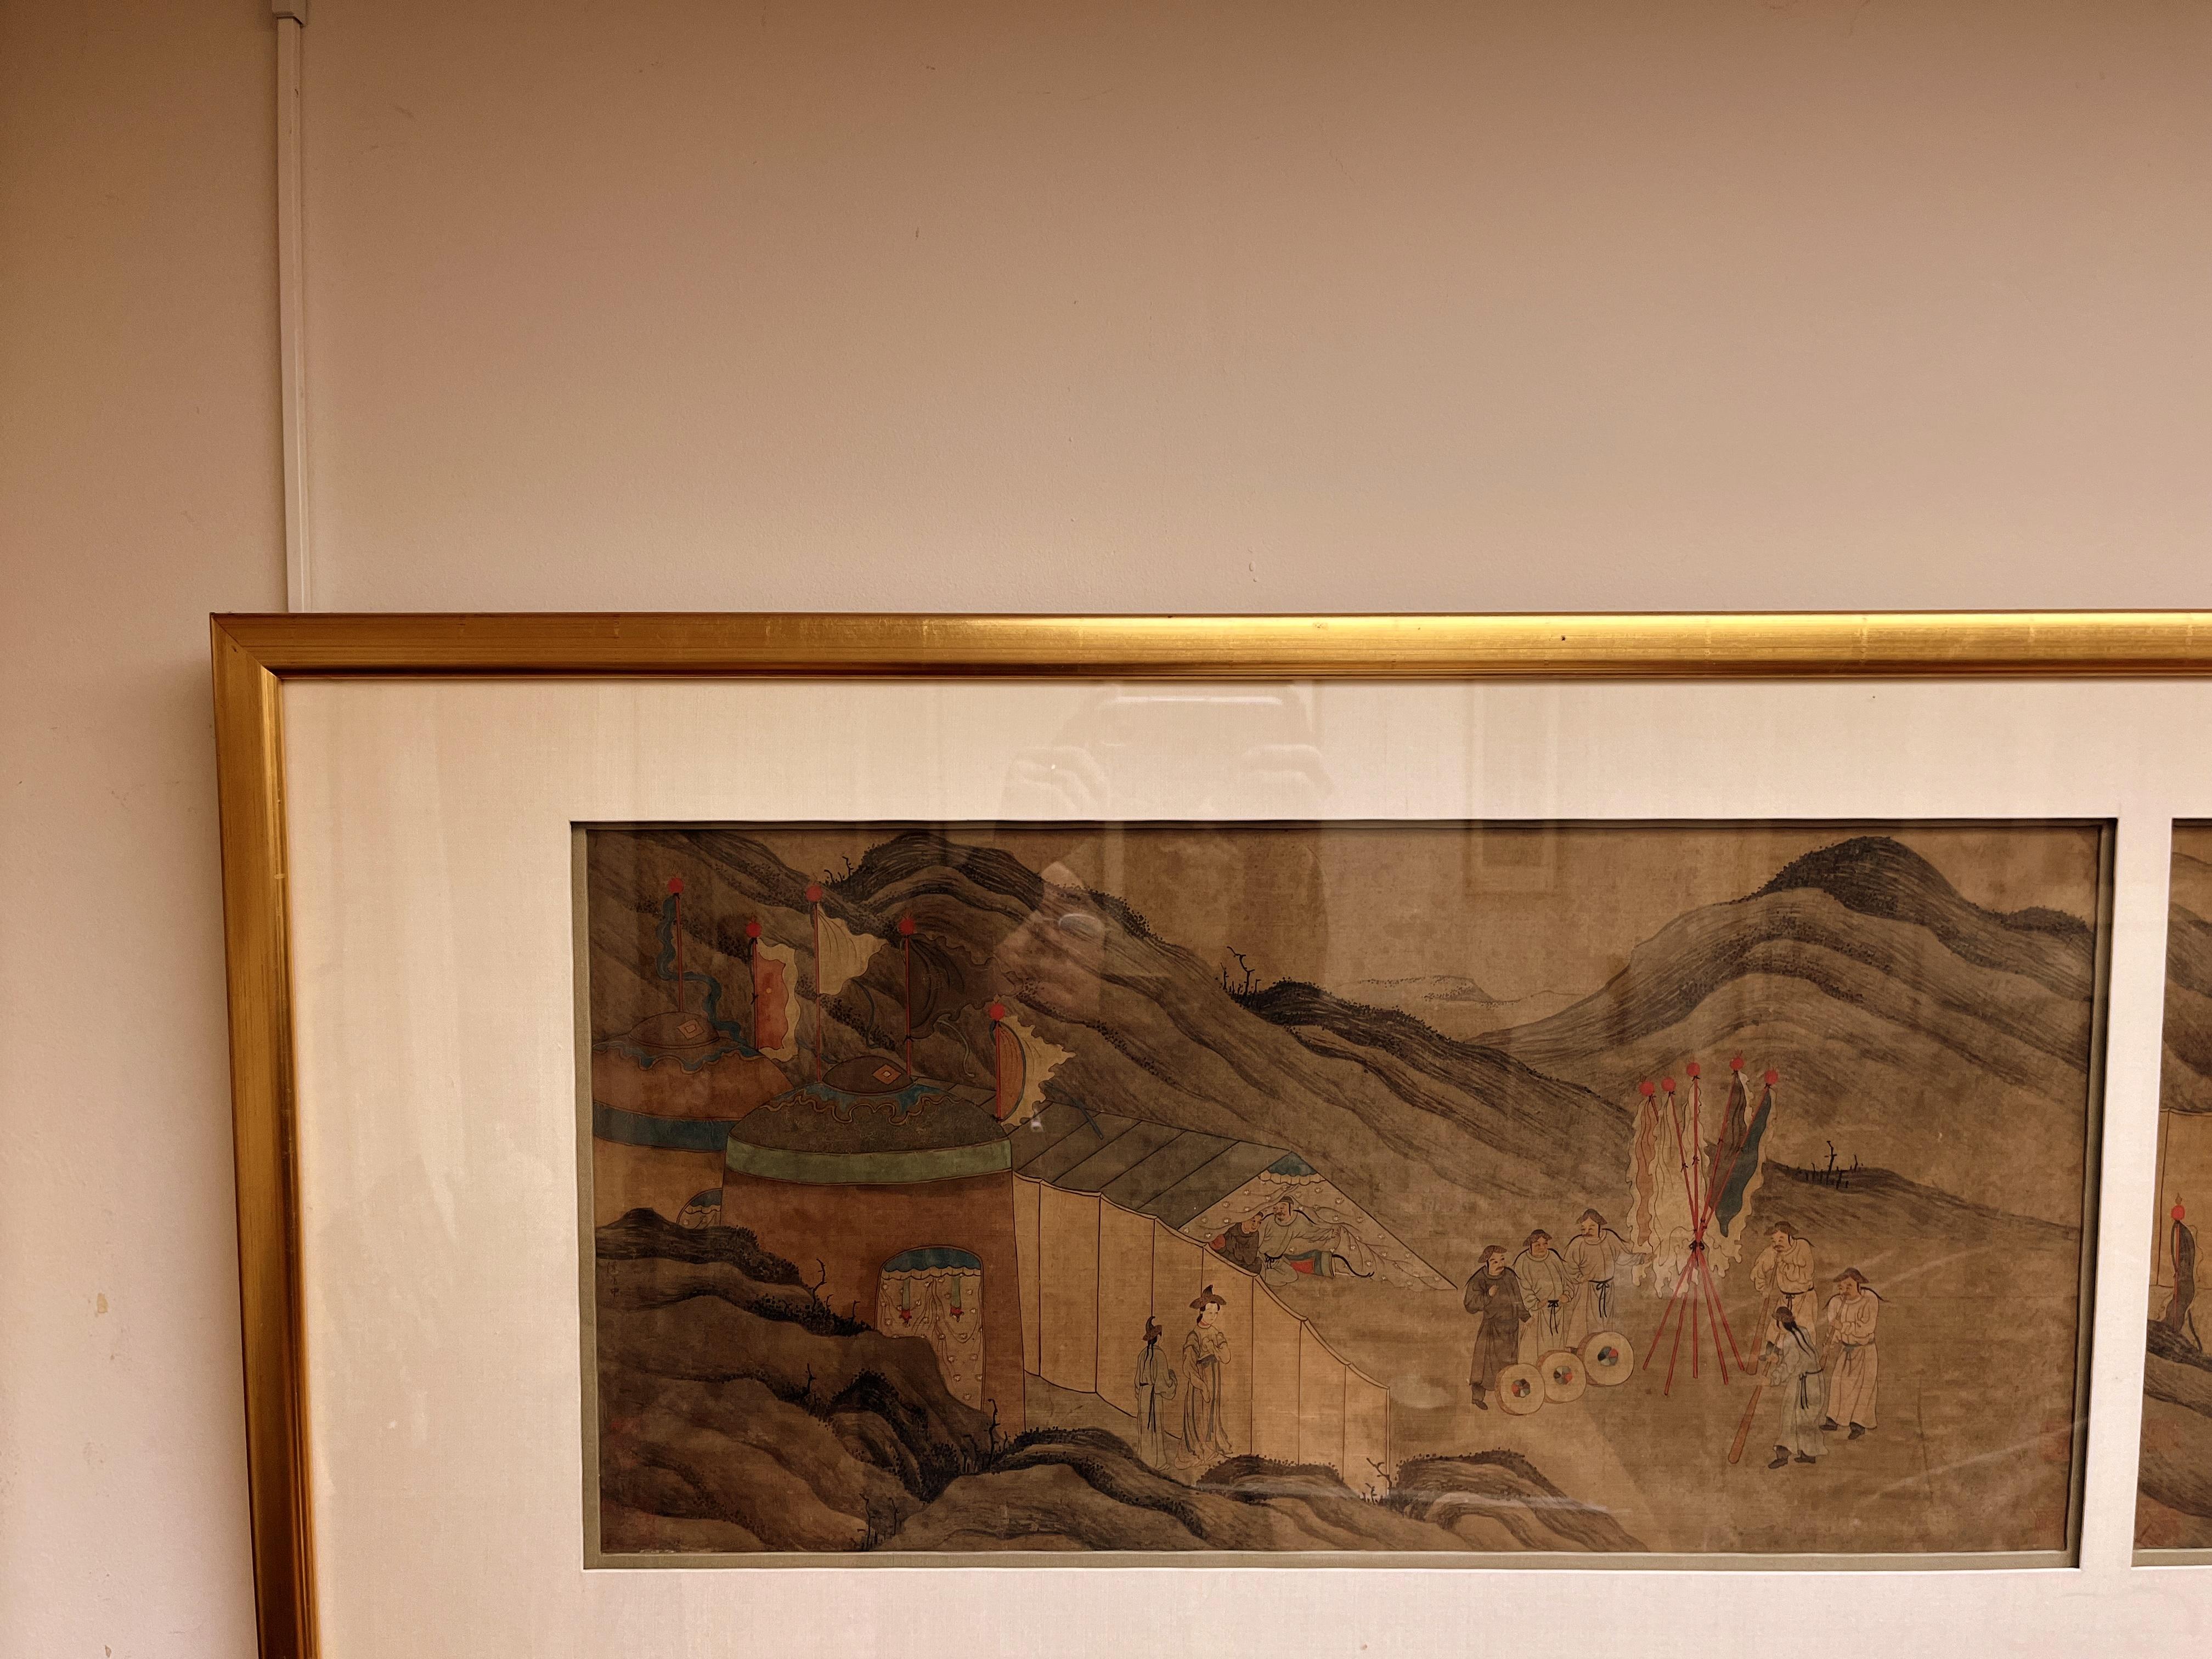 Framed Chinese Paintings of Northern Asian Nomadic Ethnic Group Livings In Good Condition For Sale In Greenwich, CT